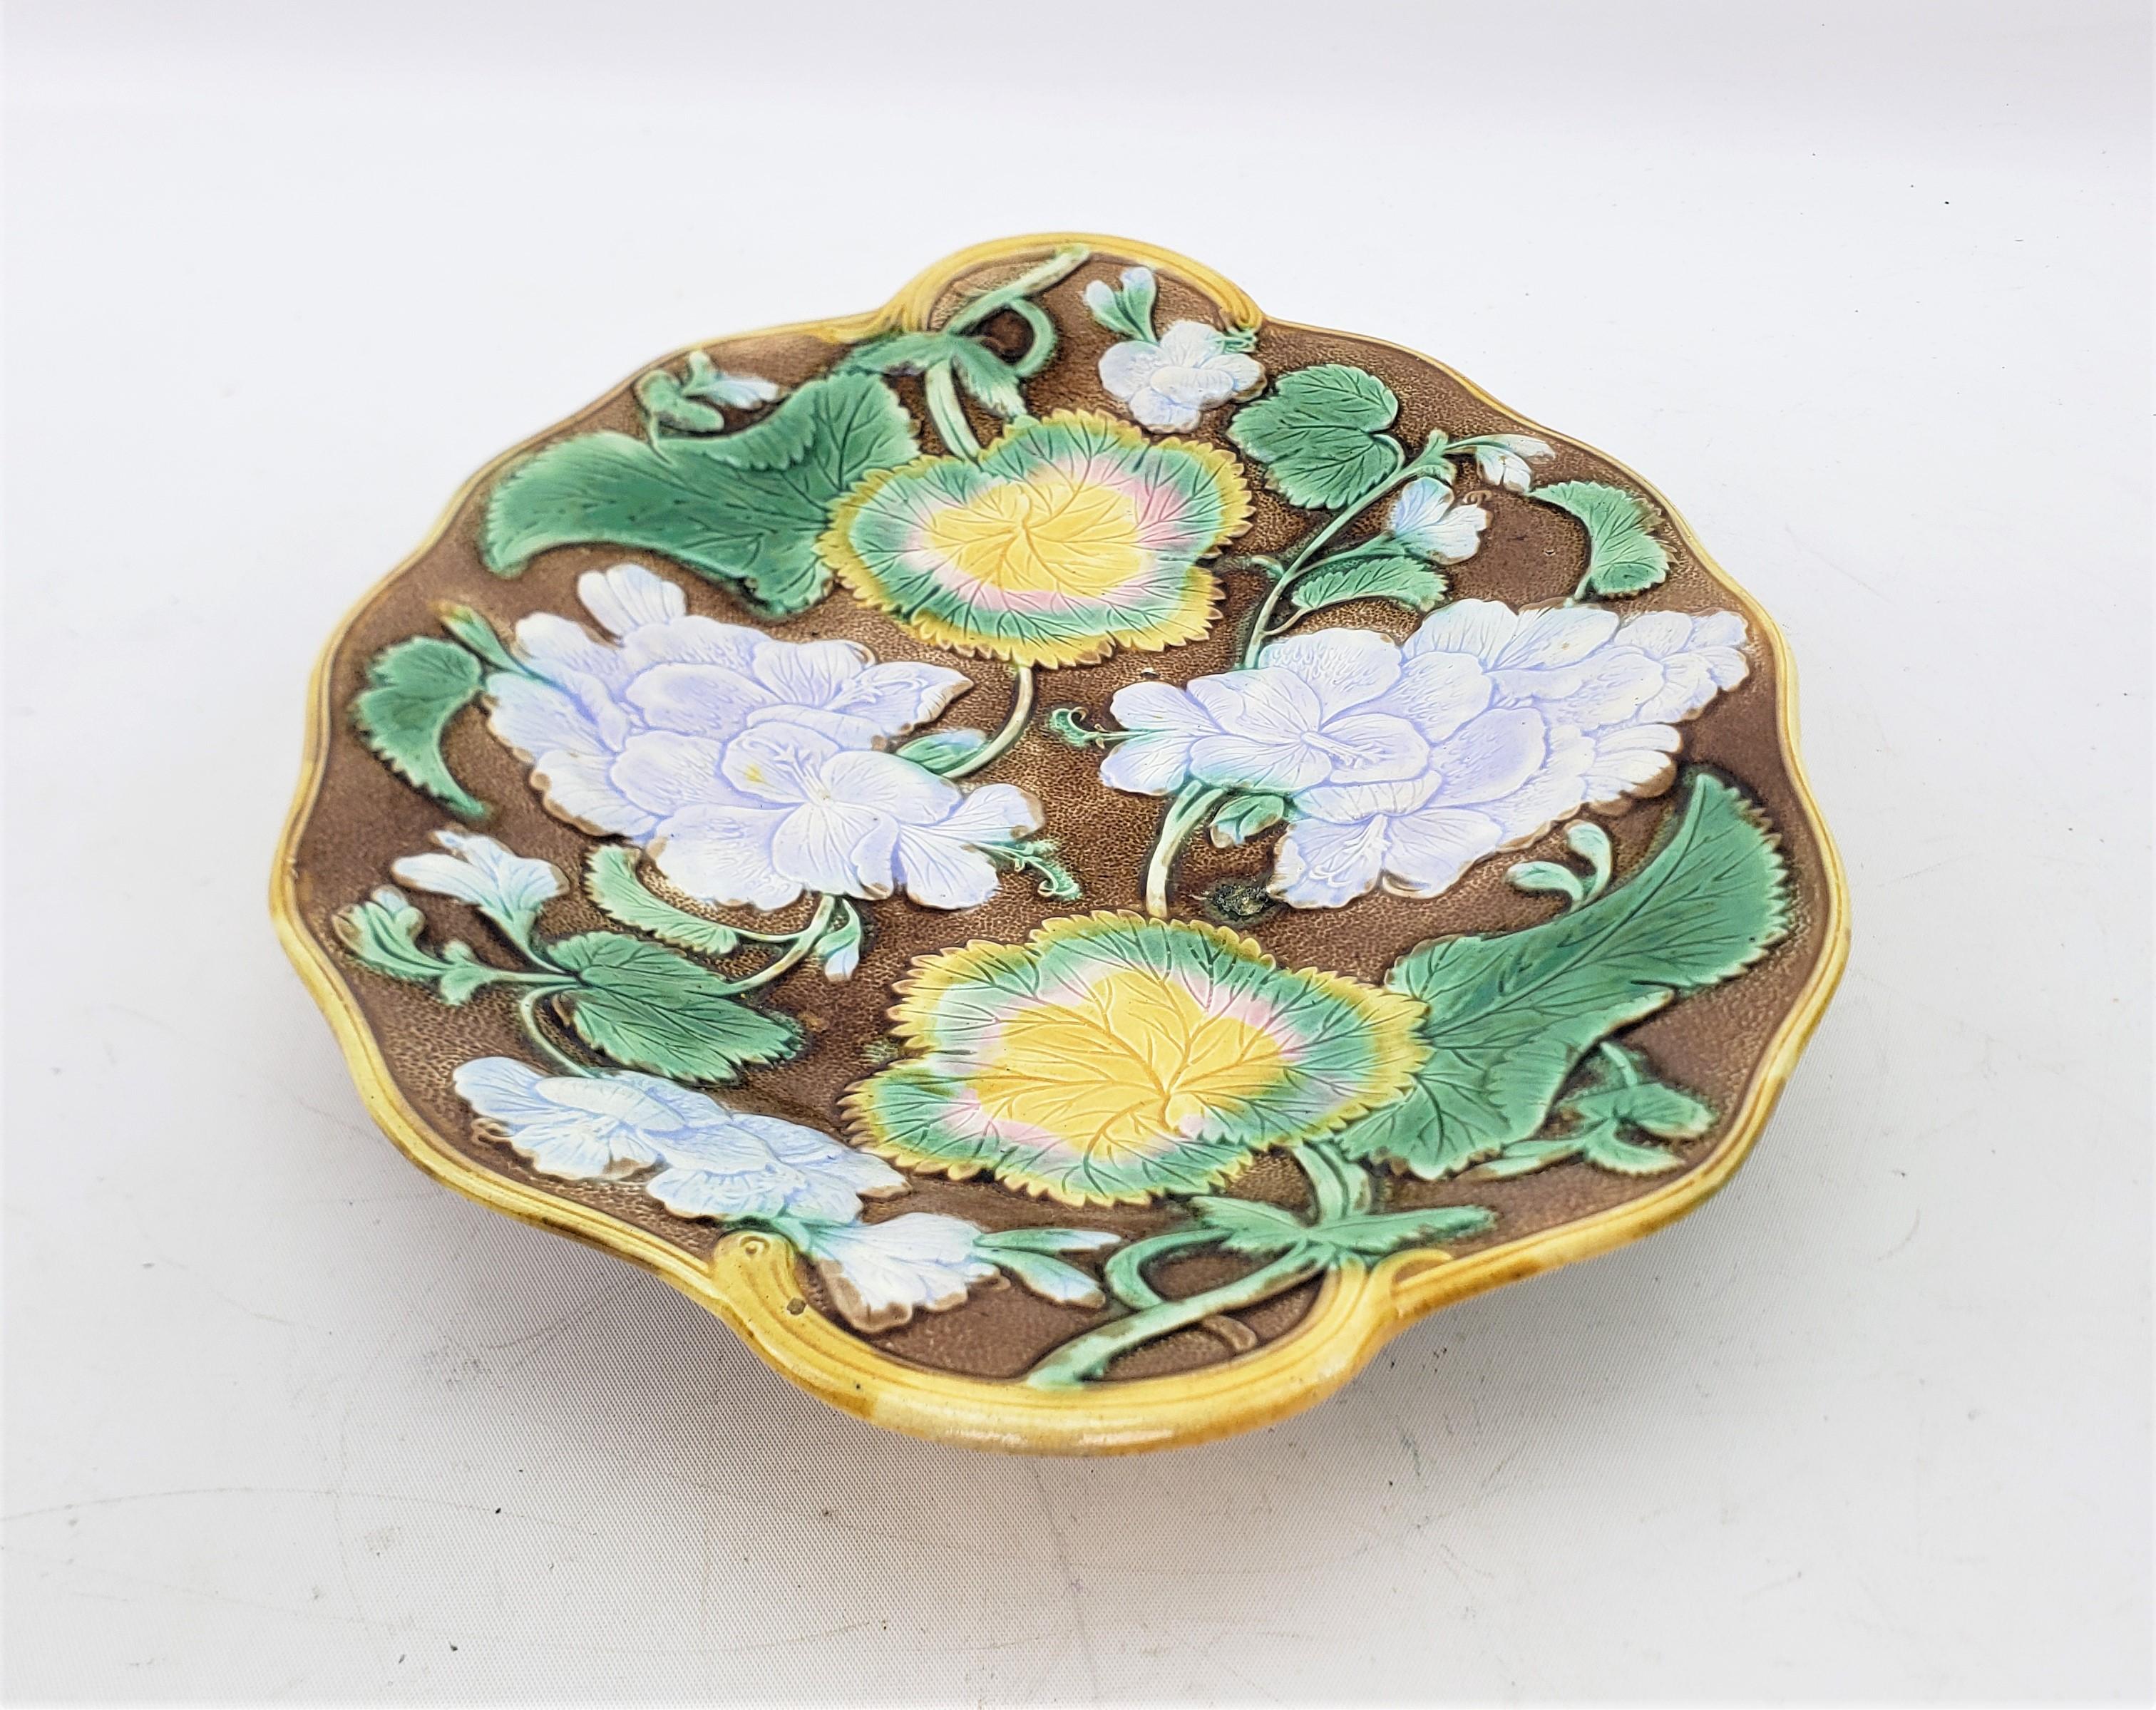 Small Antique Majolica Serving Dish or Platter with Leaf & Flower Decoration For Sale 1